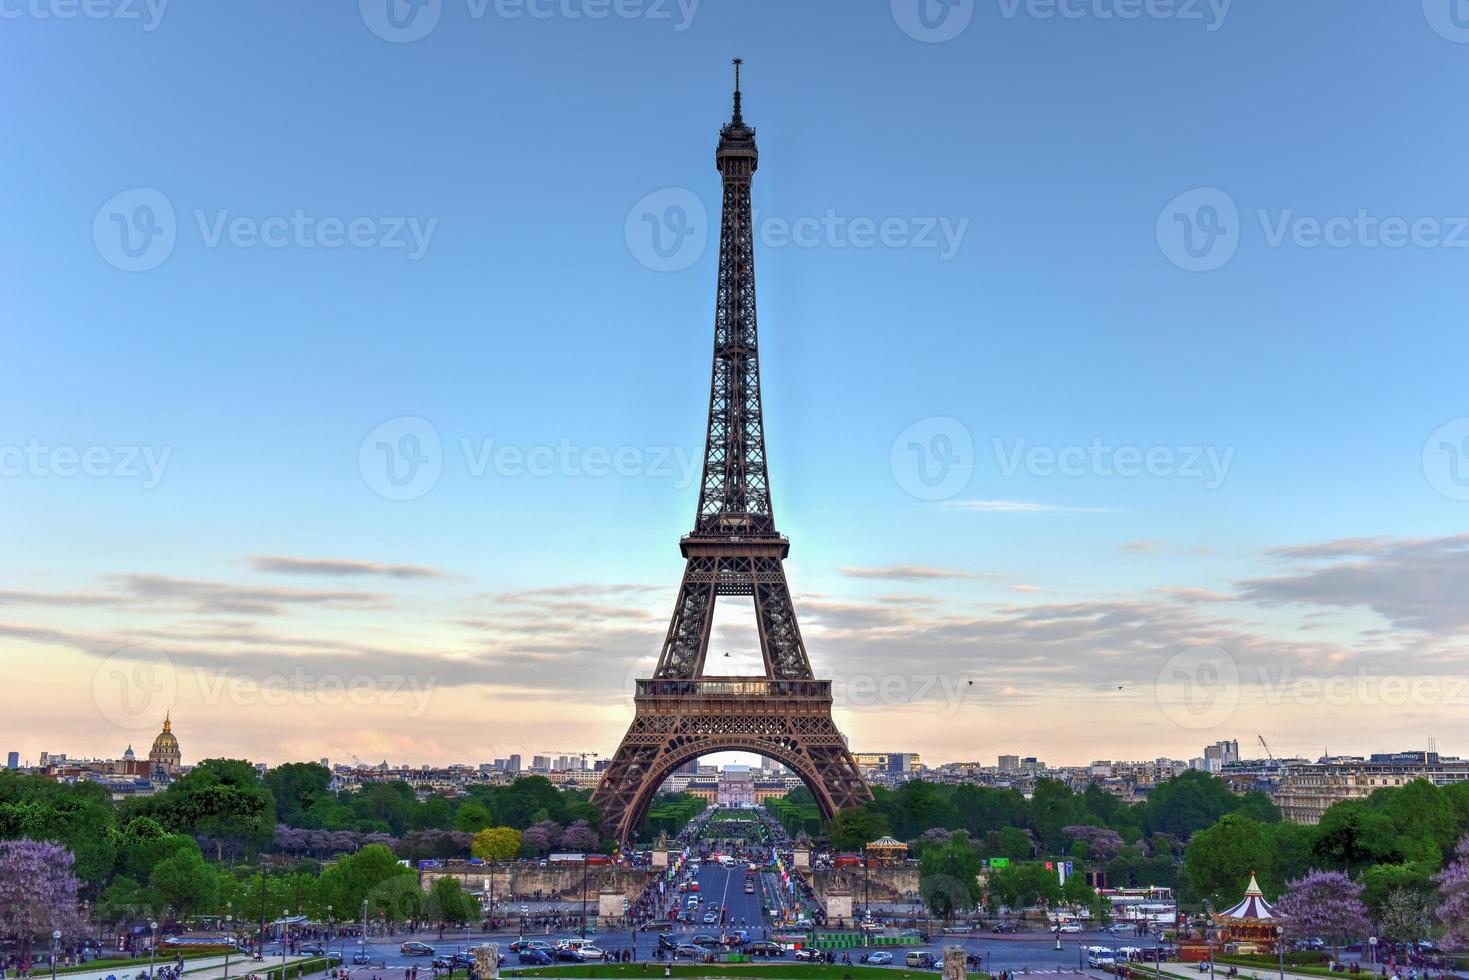 The Eiffel Tower, a wrought iron lattice tower on the Champ de Mars in Paris, France. photo